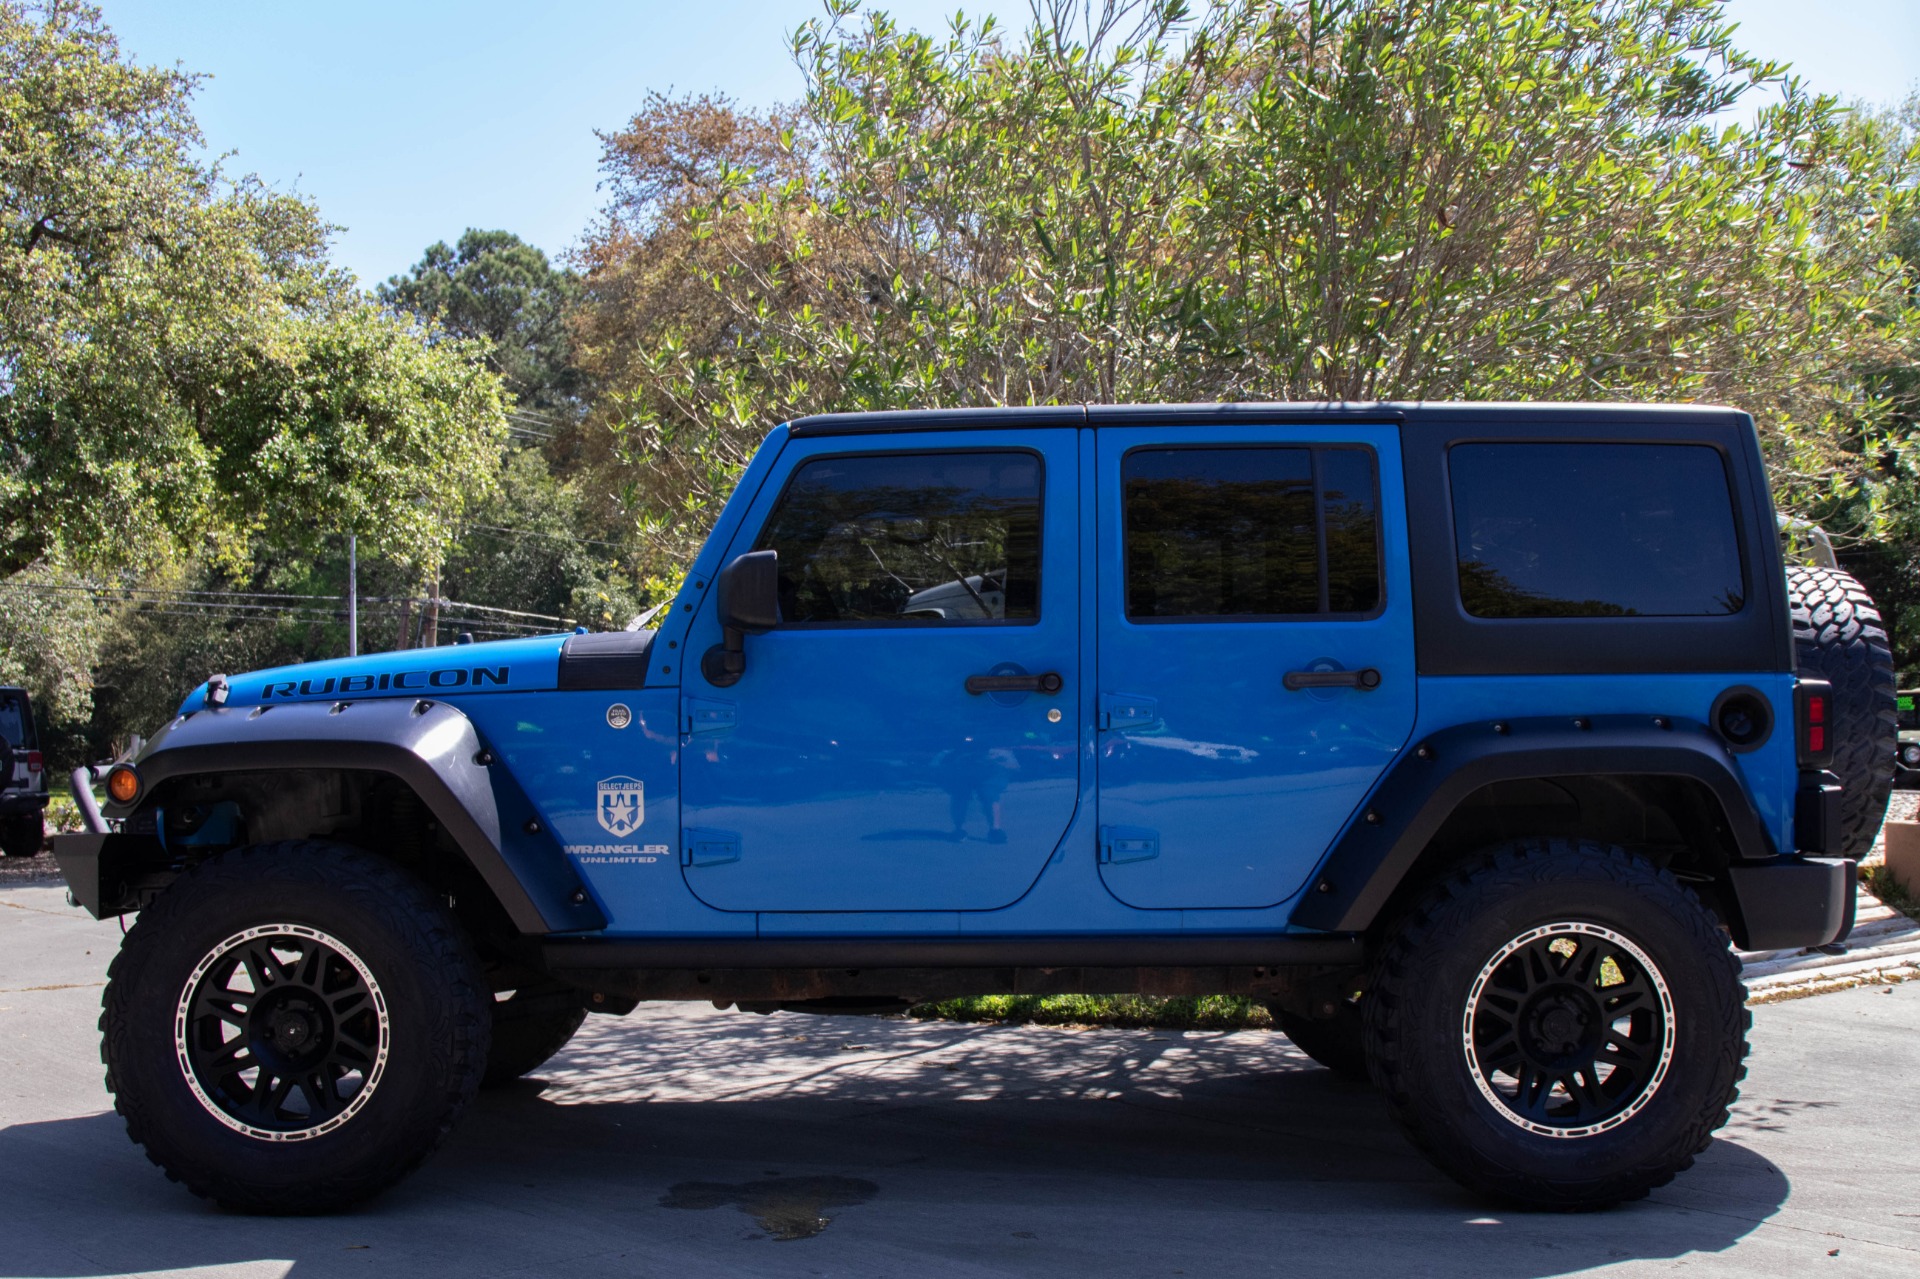 Used 2011 Jeep Wrangler Unlimited Rubicon For Sale ($24,995) | Select Jeeps  Inc. Stock #574027